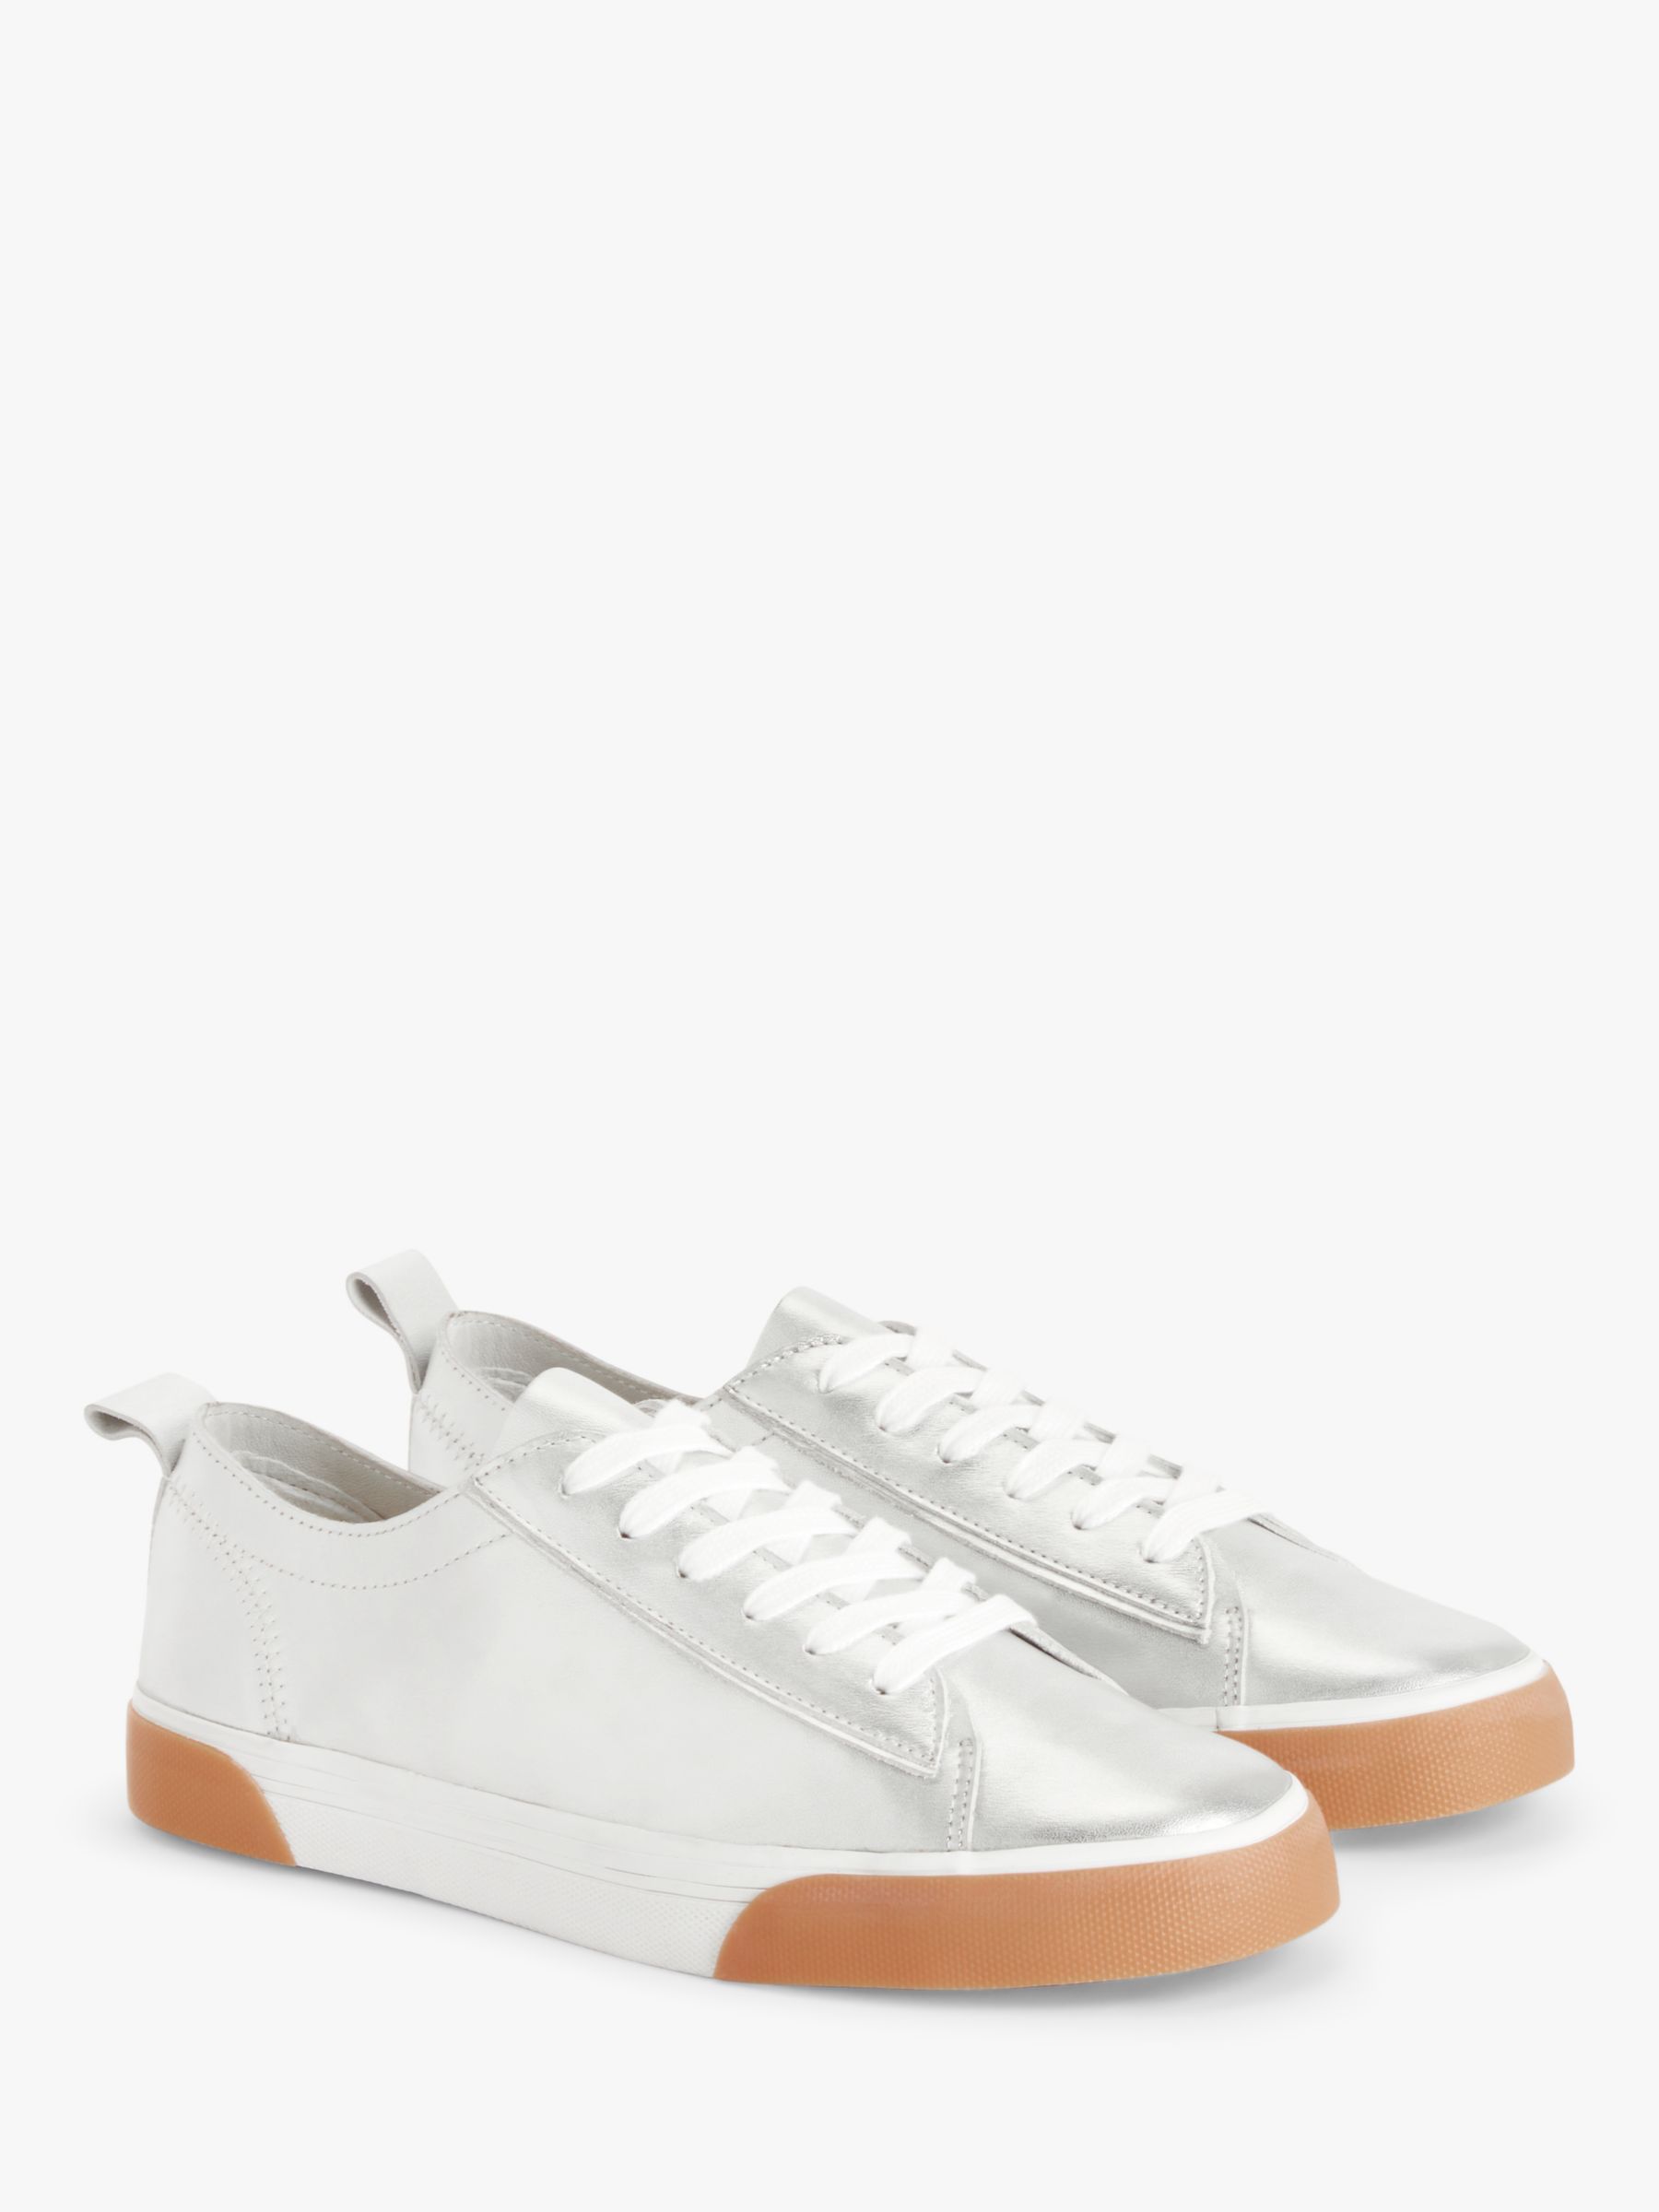 poco claro lago Titicaca Universidad John Lewis ANYDAY Eliza Leather Lace Up Trainers, Silver at John Lewis &  Partners